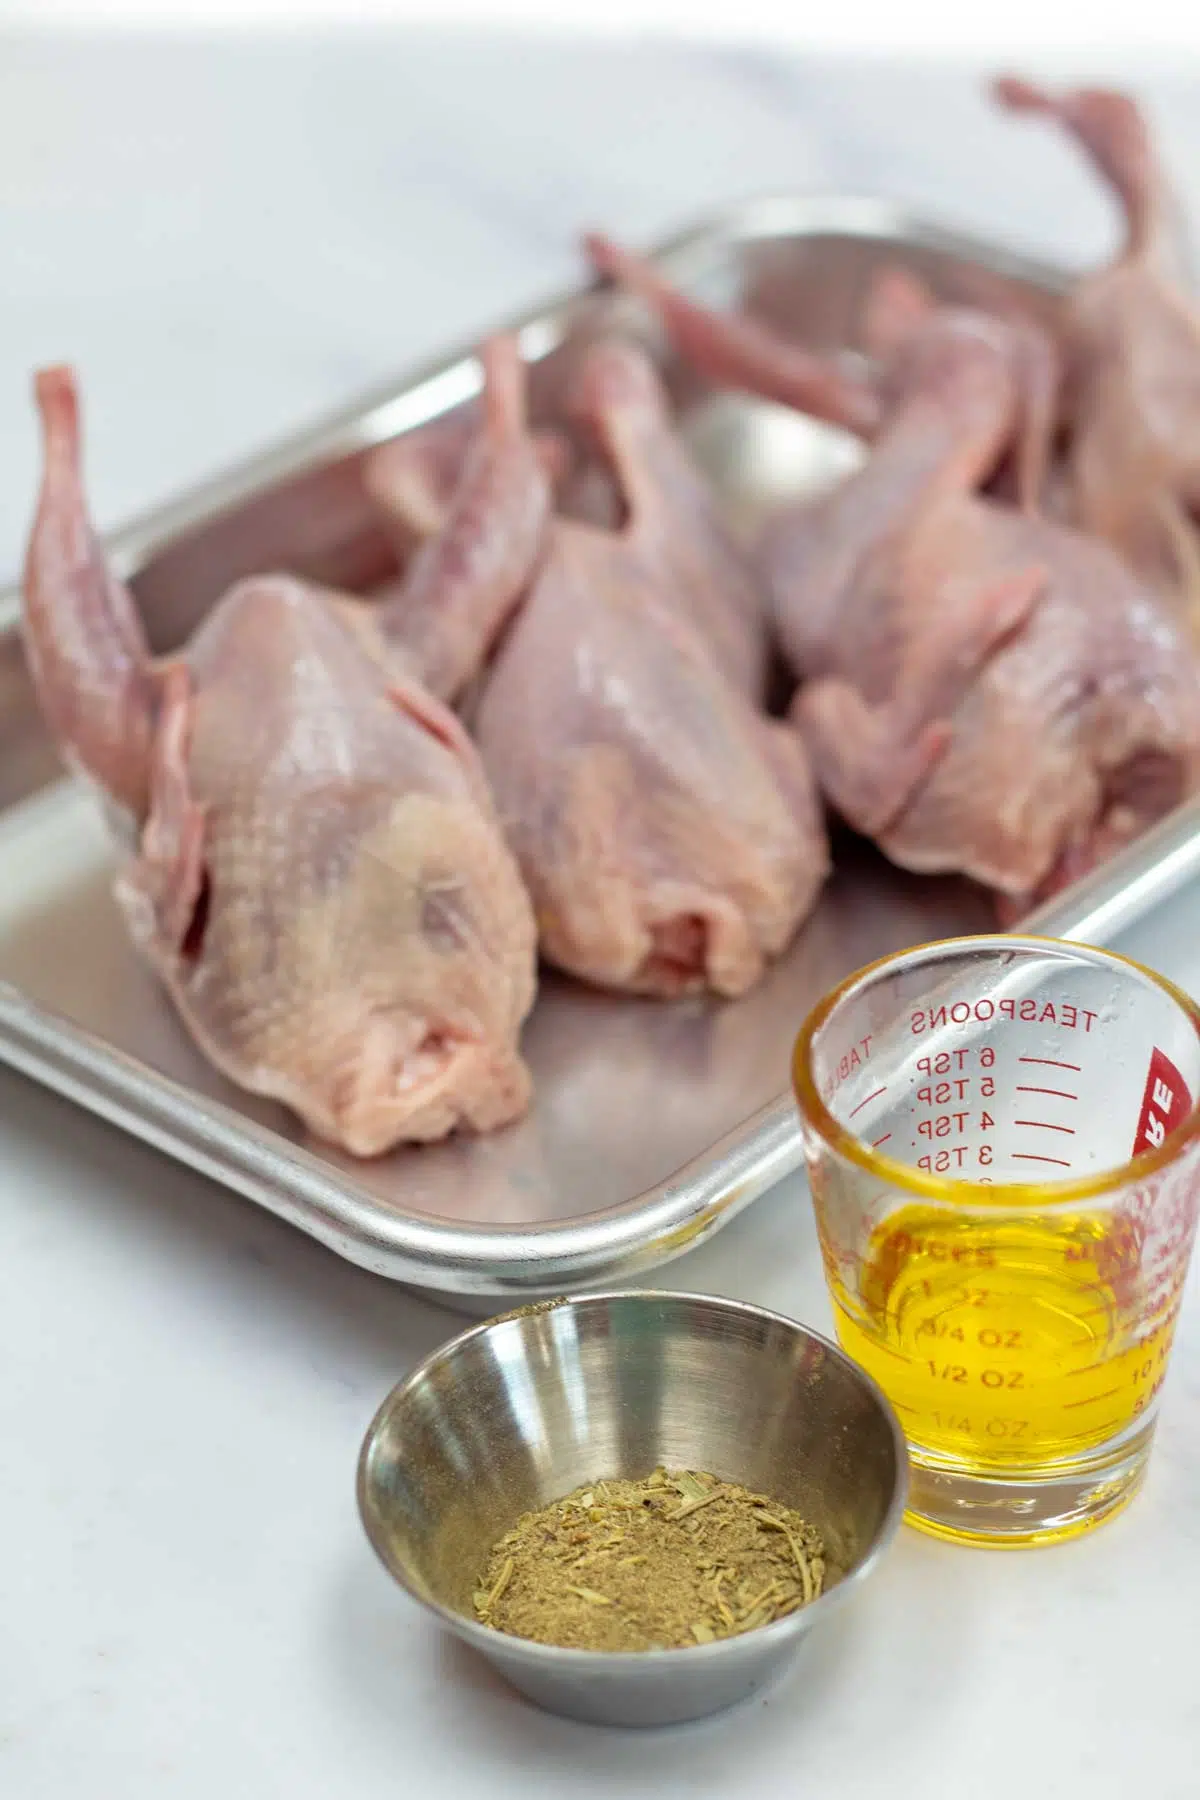 Tall image showing ingredients needed for roasted quail.